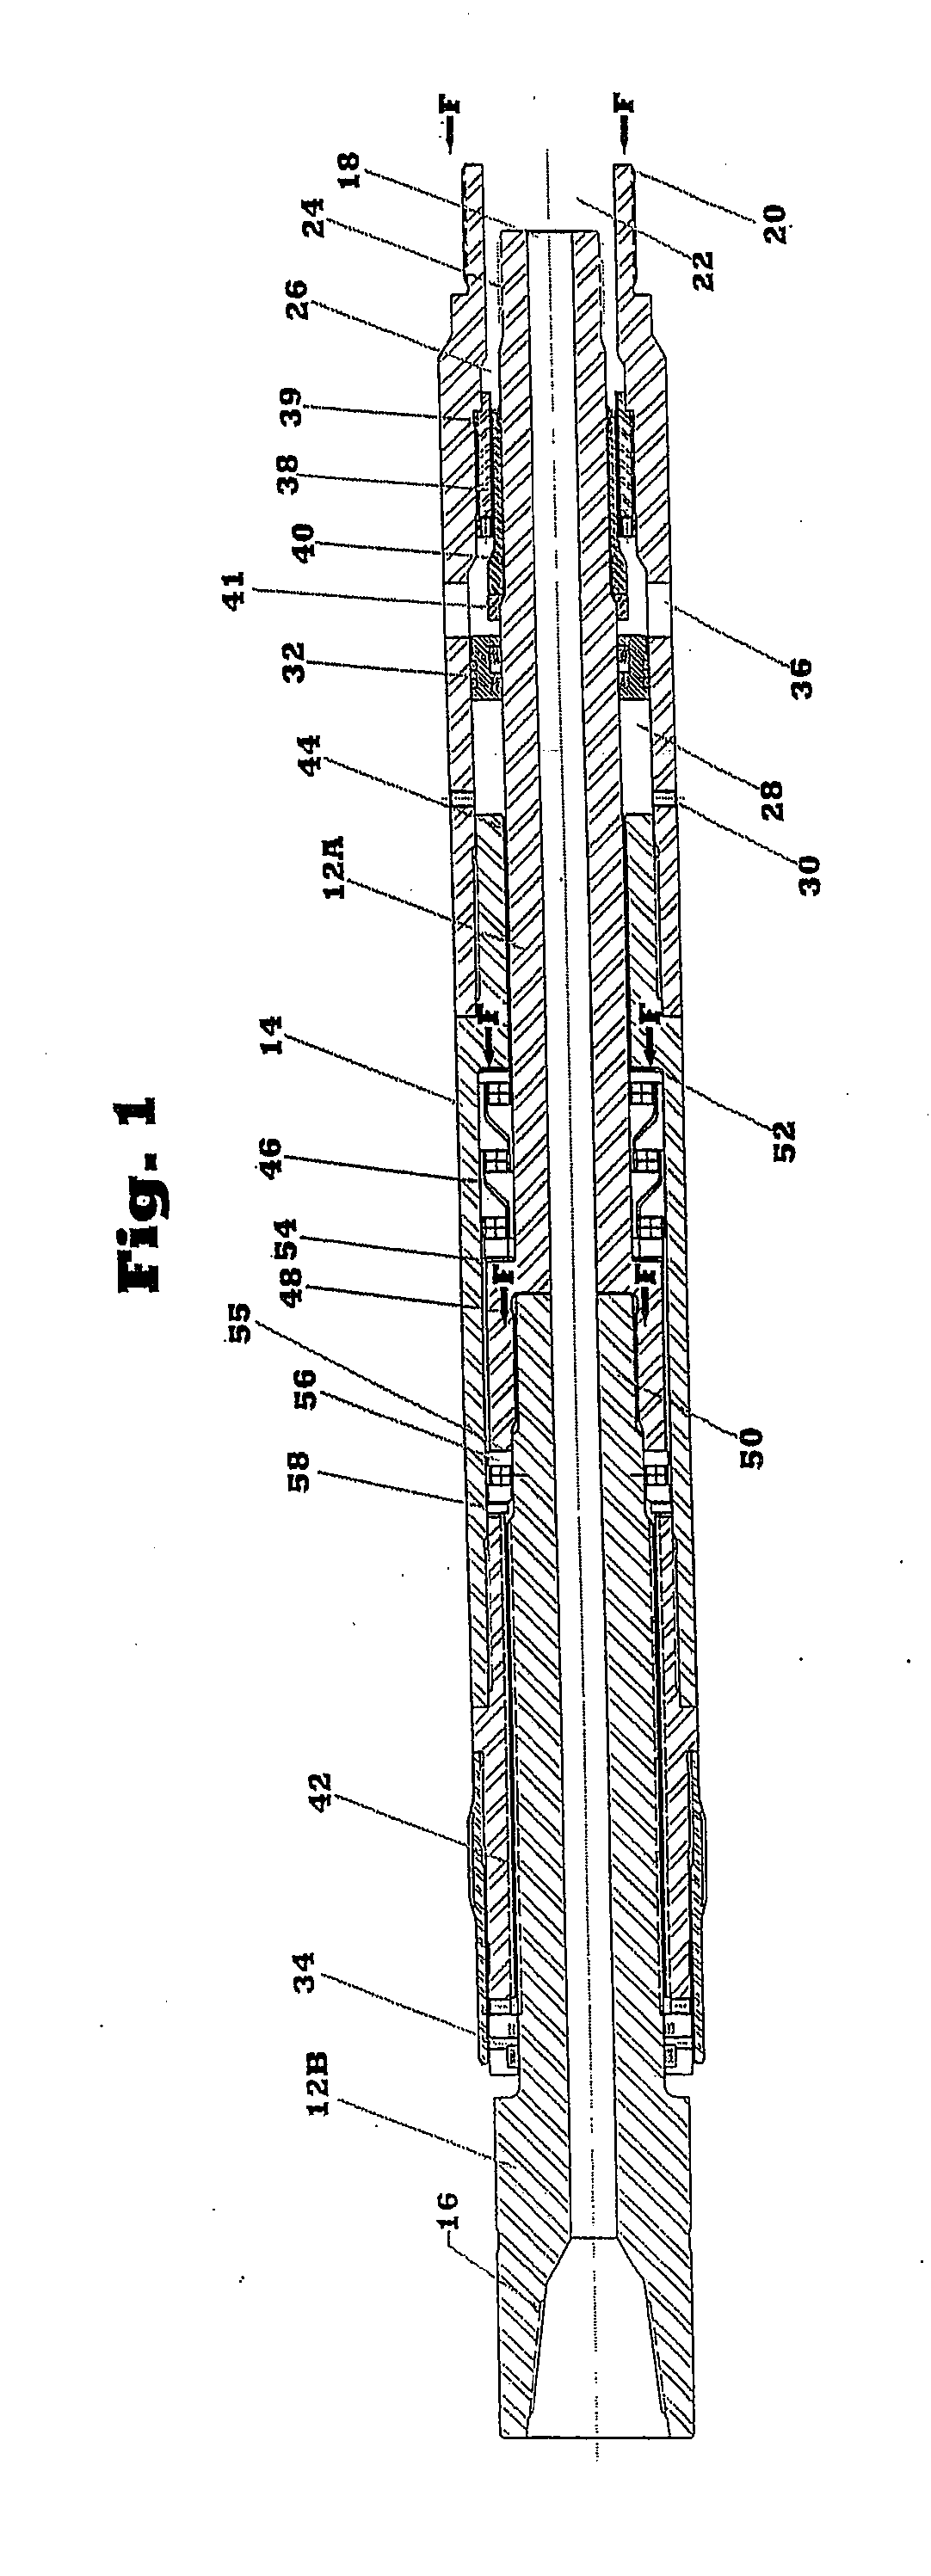 Bearing assembly for downhole mud motor